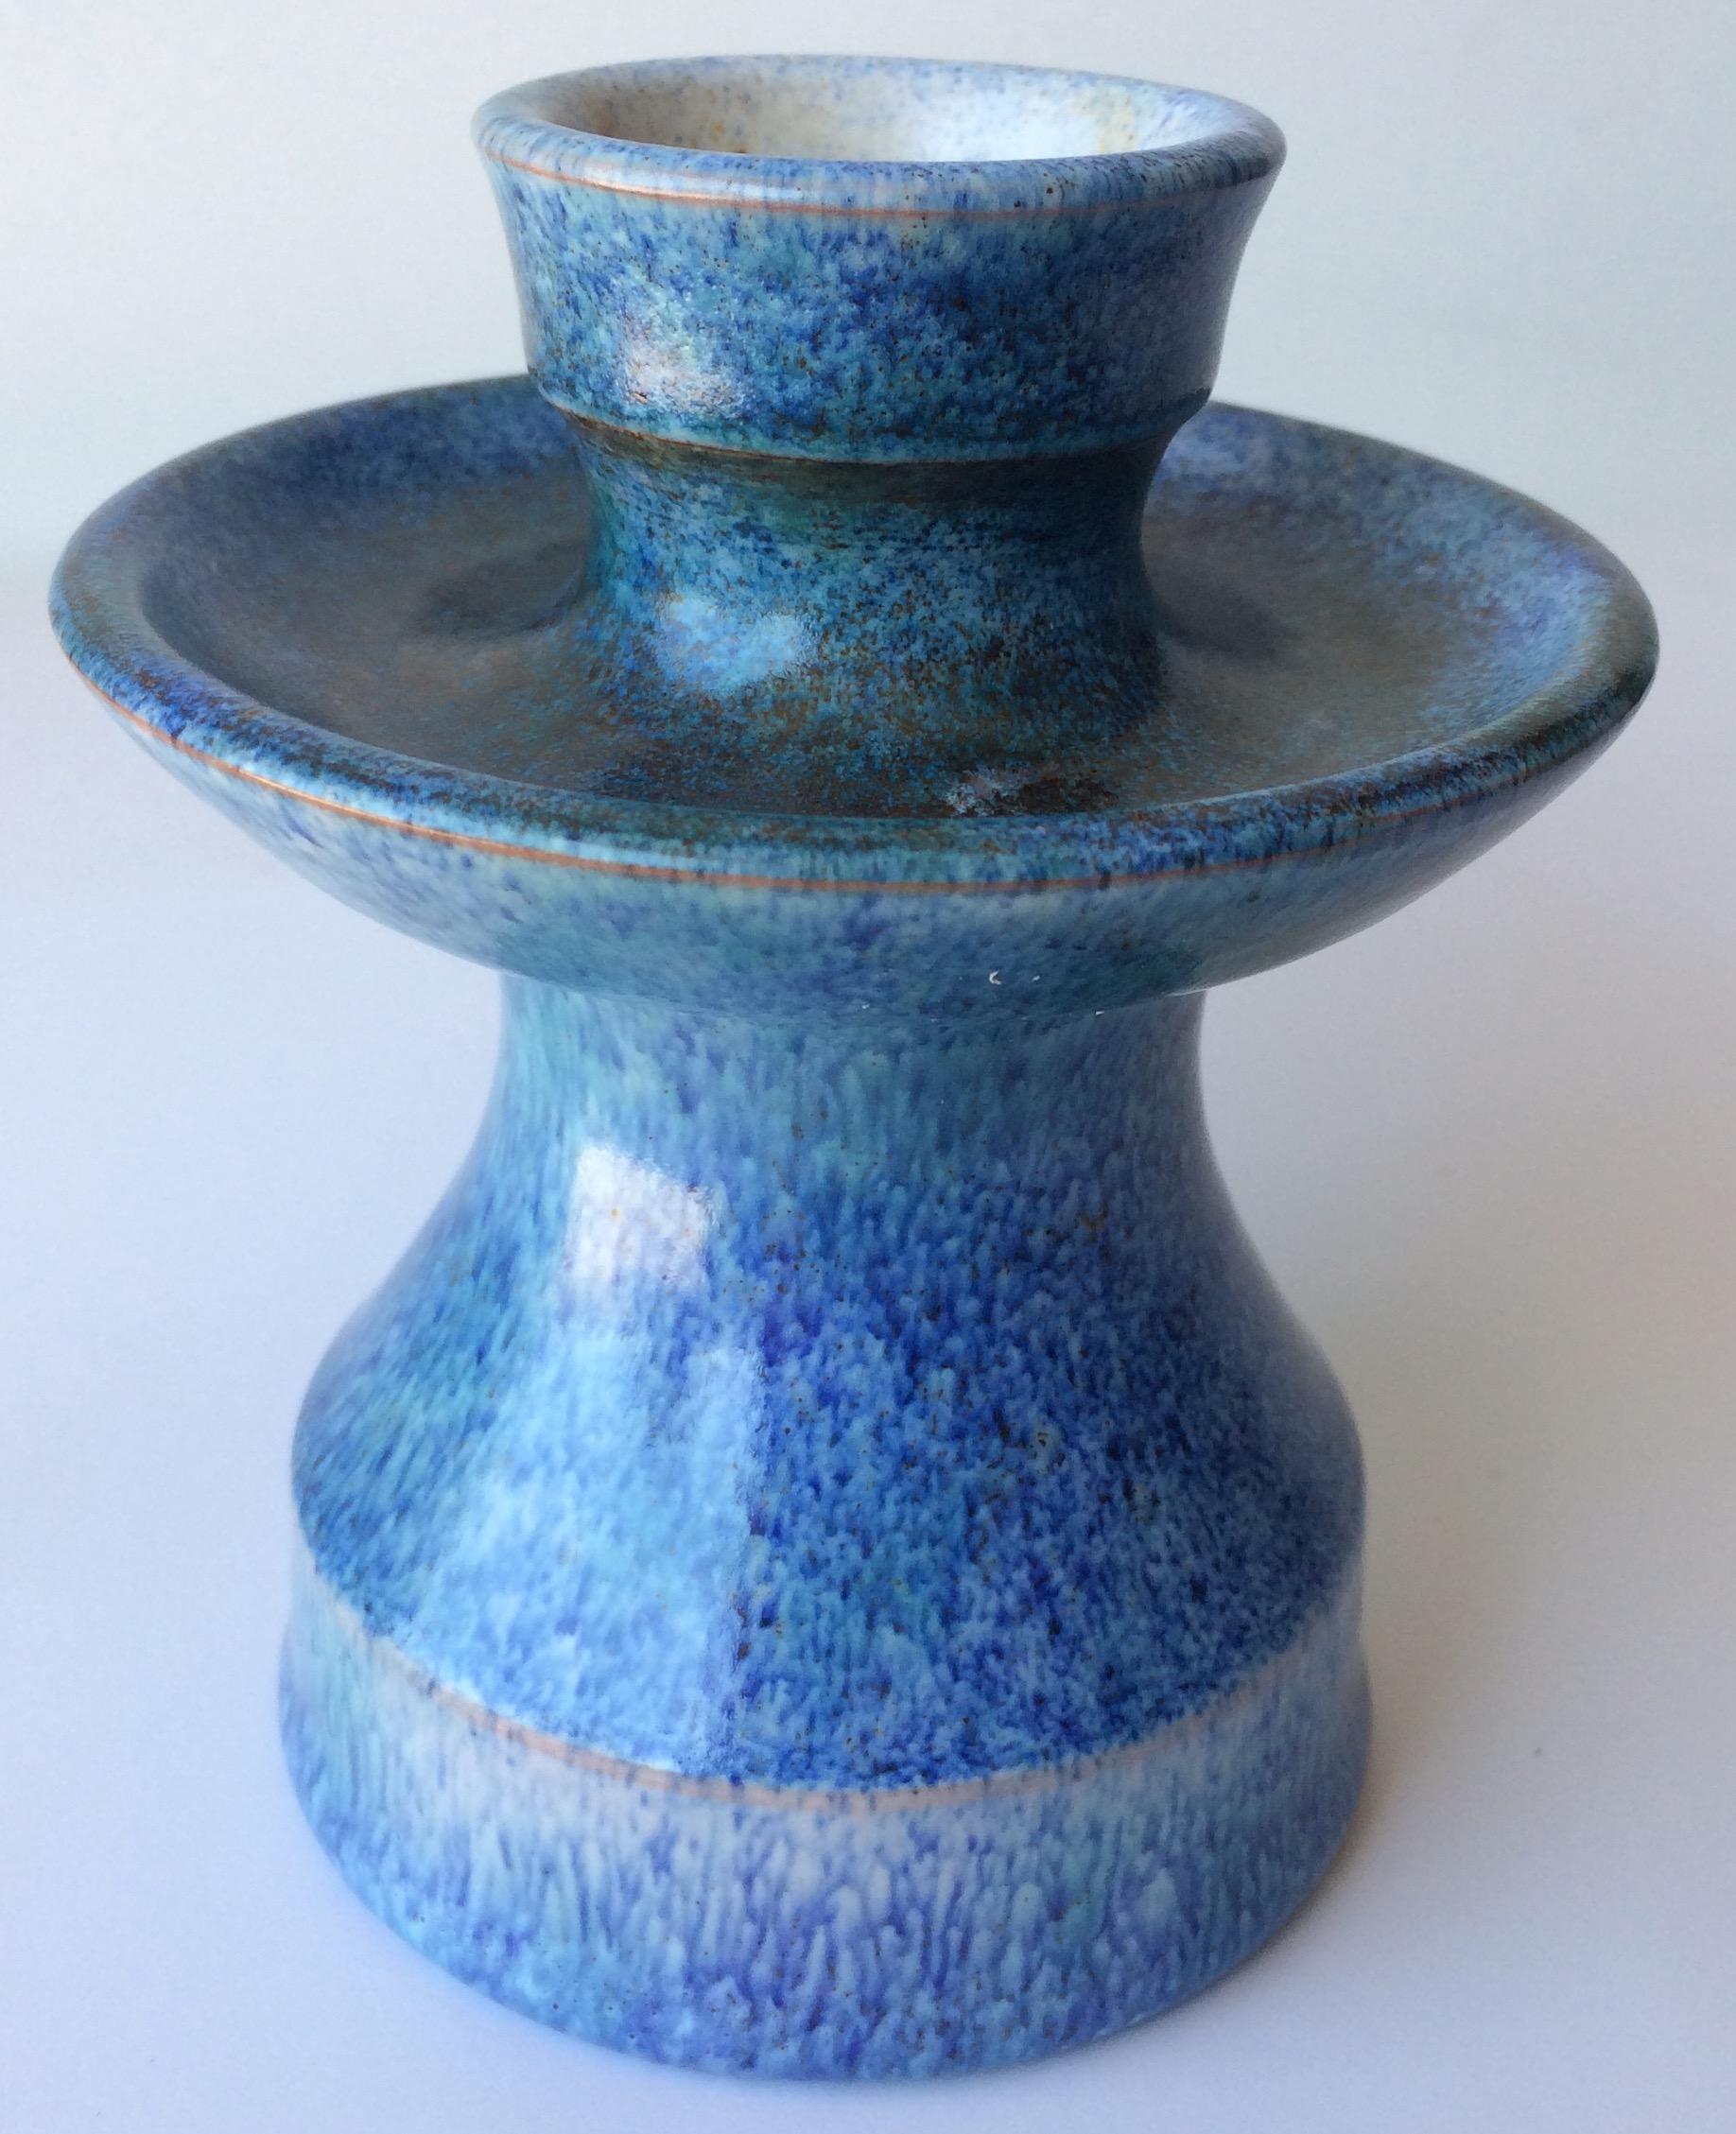 Decorative Ceramic Candleholder by Pscheffer In Good Condition For Sale In Miami, FL